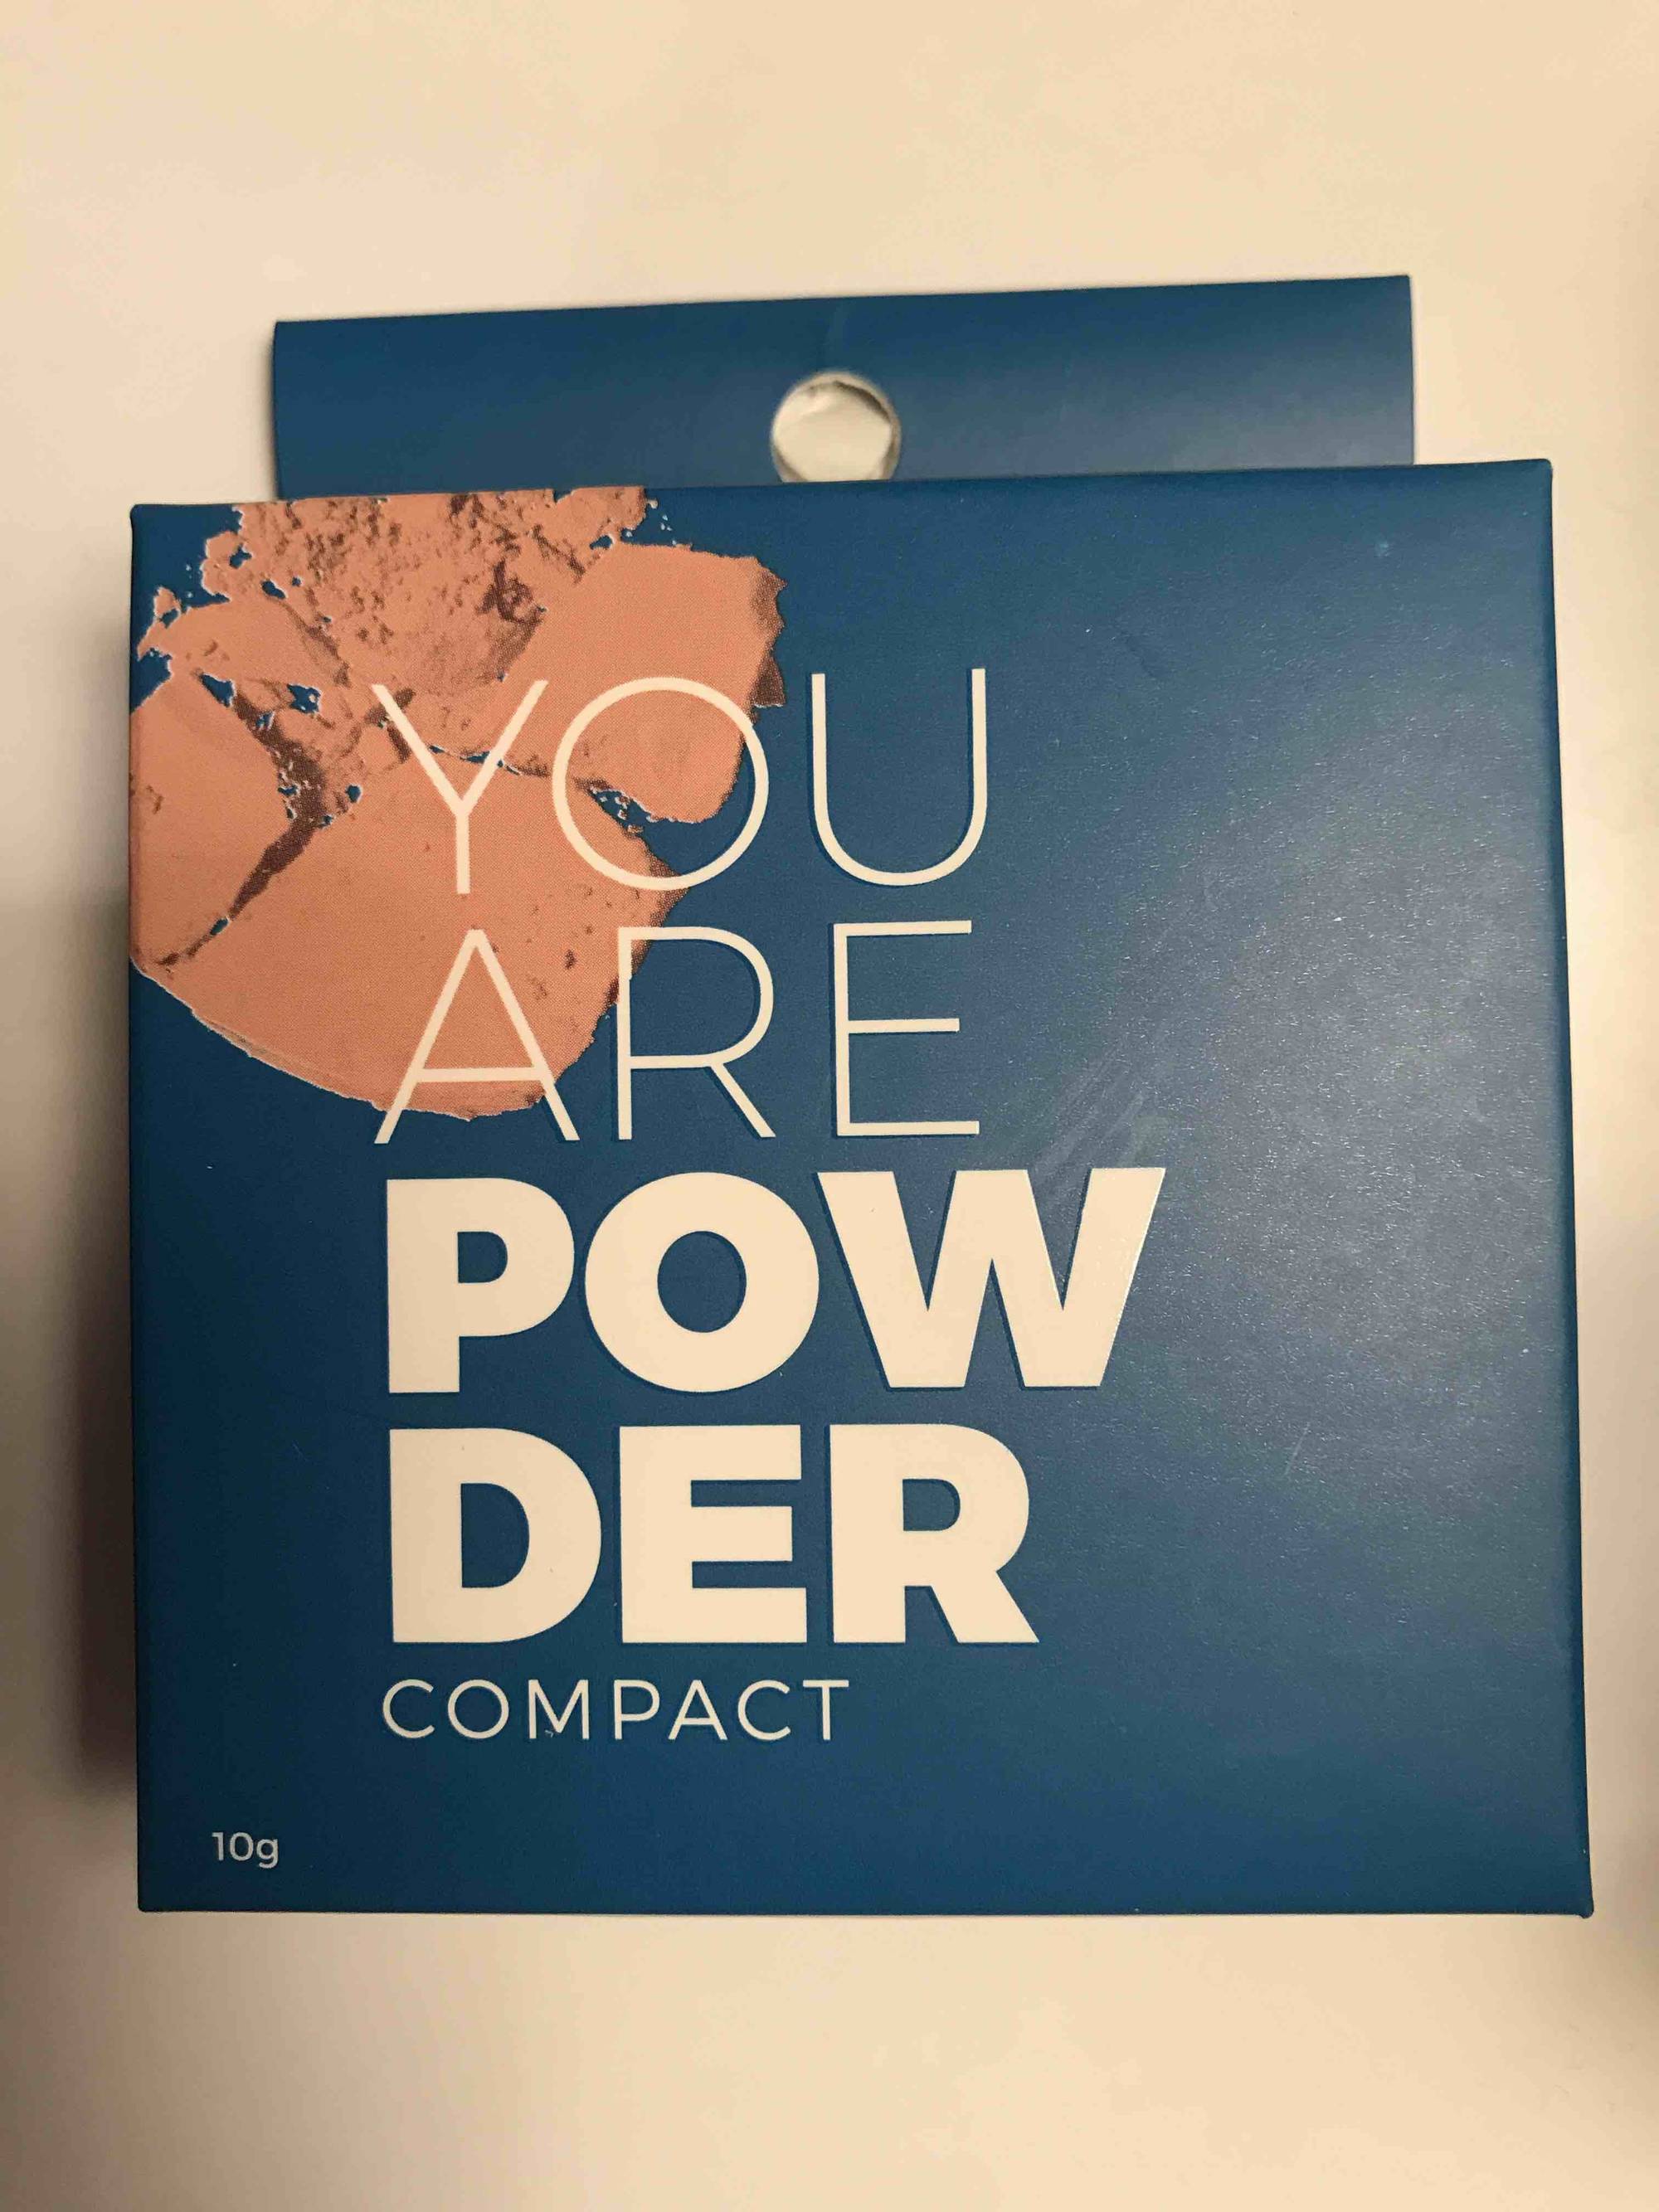 YOU ARE - Powder compact